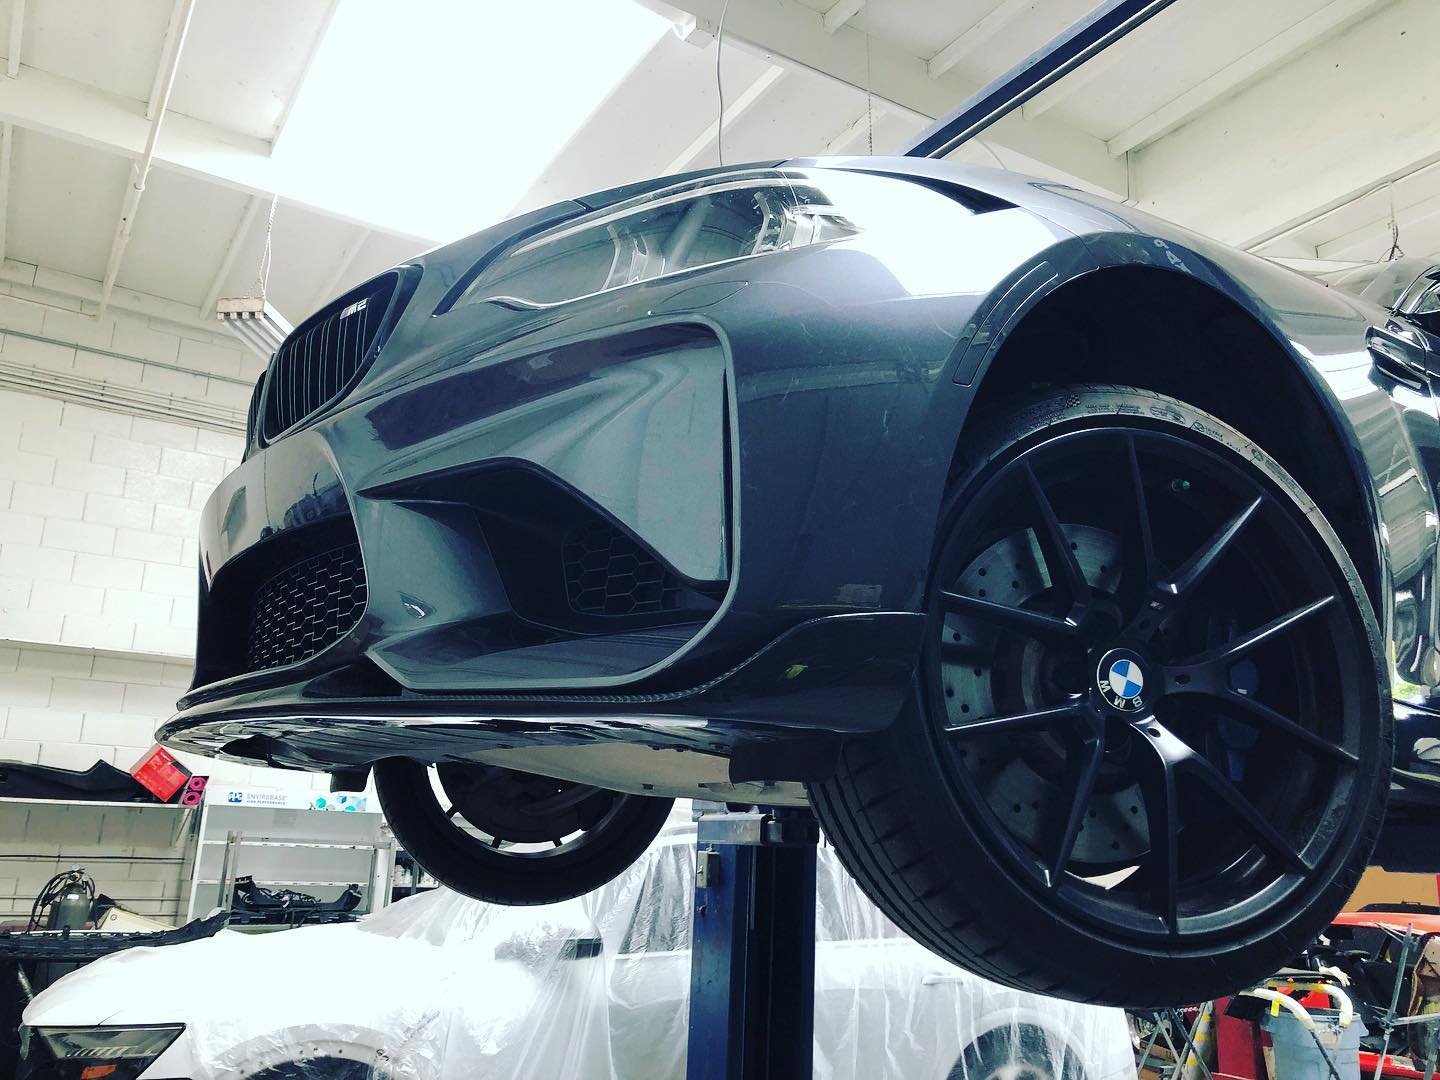 BMW F87 M2. Front Carbon Lip Install. Rear Diffuser Install. Complete Paint Correction. Front Bumper Insurance Collision Repair Replaced with OEM BMW Part @peterpanbmw. #auto #automotive #autobody #bmw #bmwm #bmwlove #bmwgram #bmwclub #bmwm2 #bmwusa 